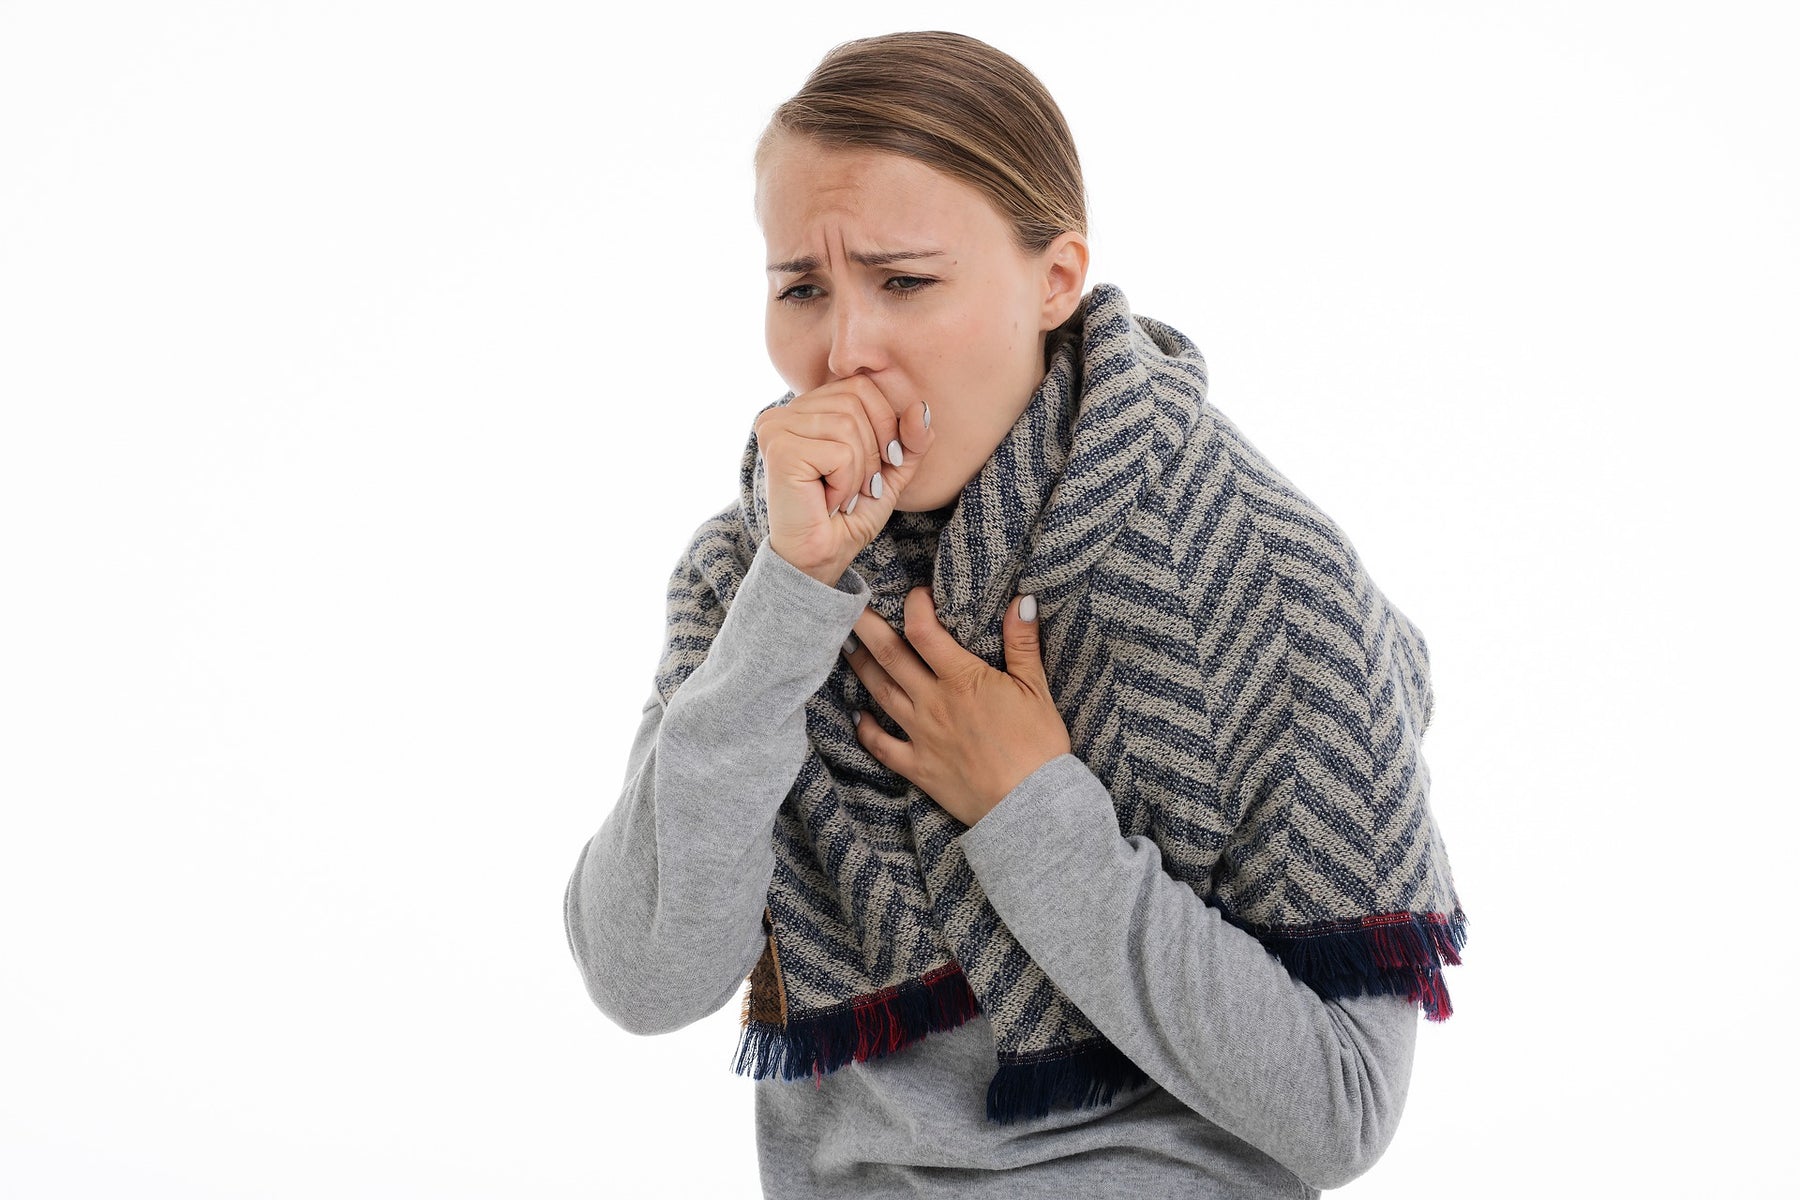 Woman in grey coughing with her hand over mouth